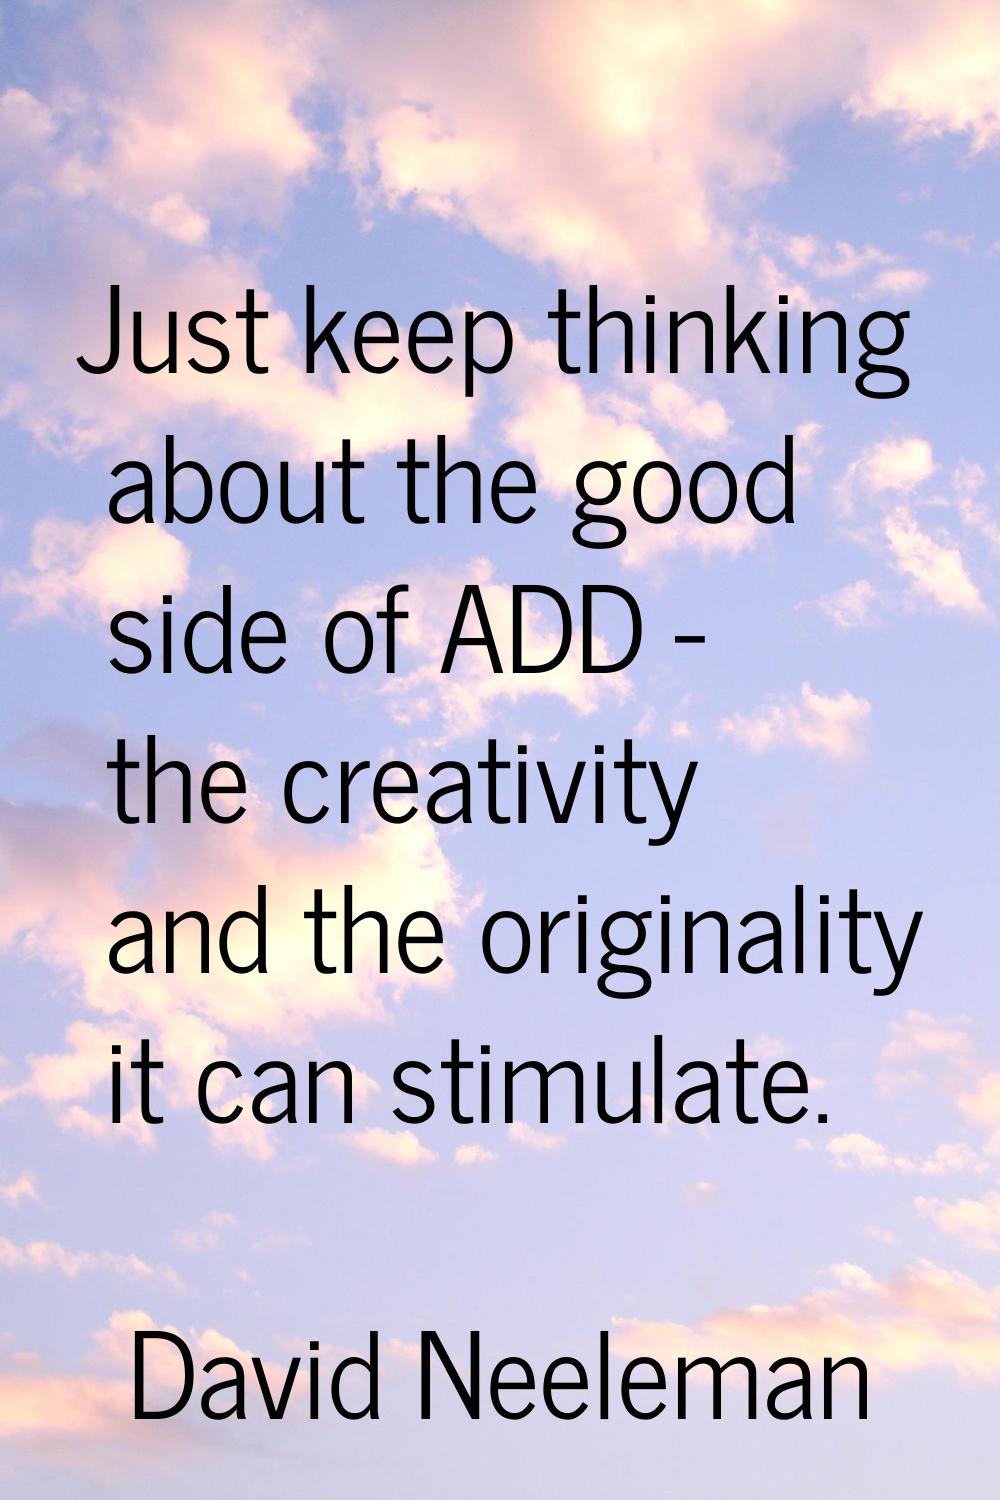 Just keep thinking about the good side of ADD - the creativity and the originality it can stimulate